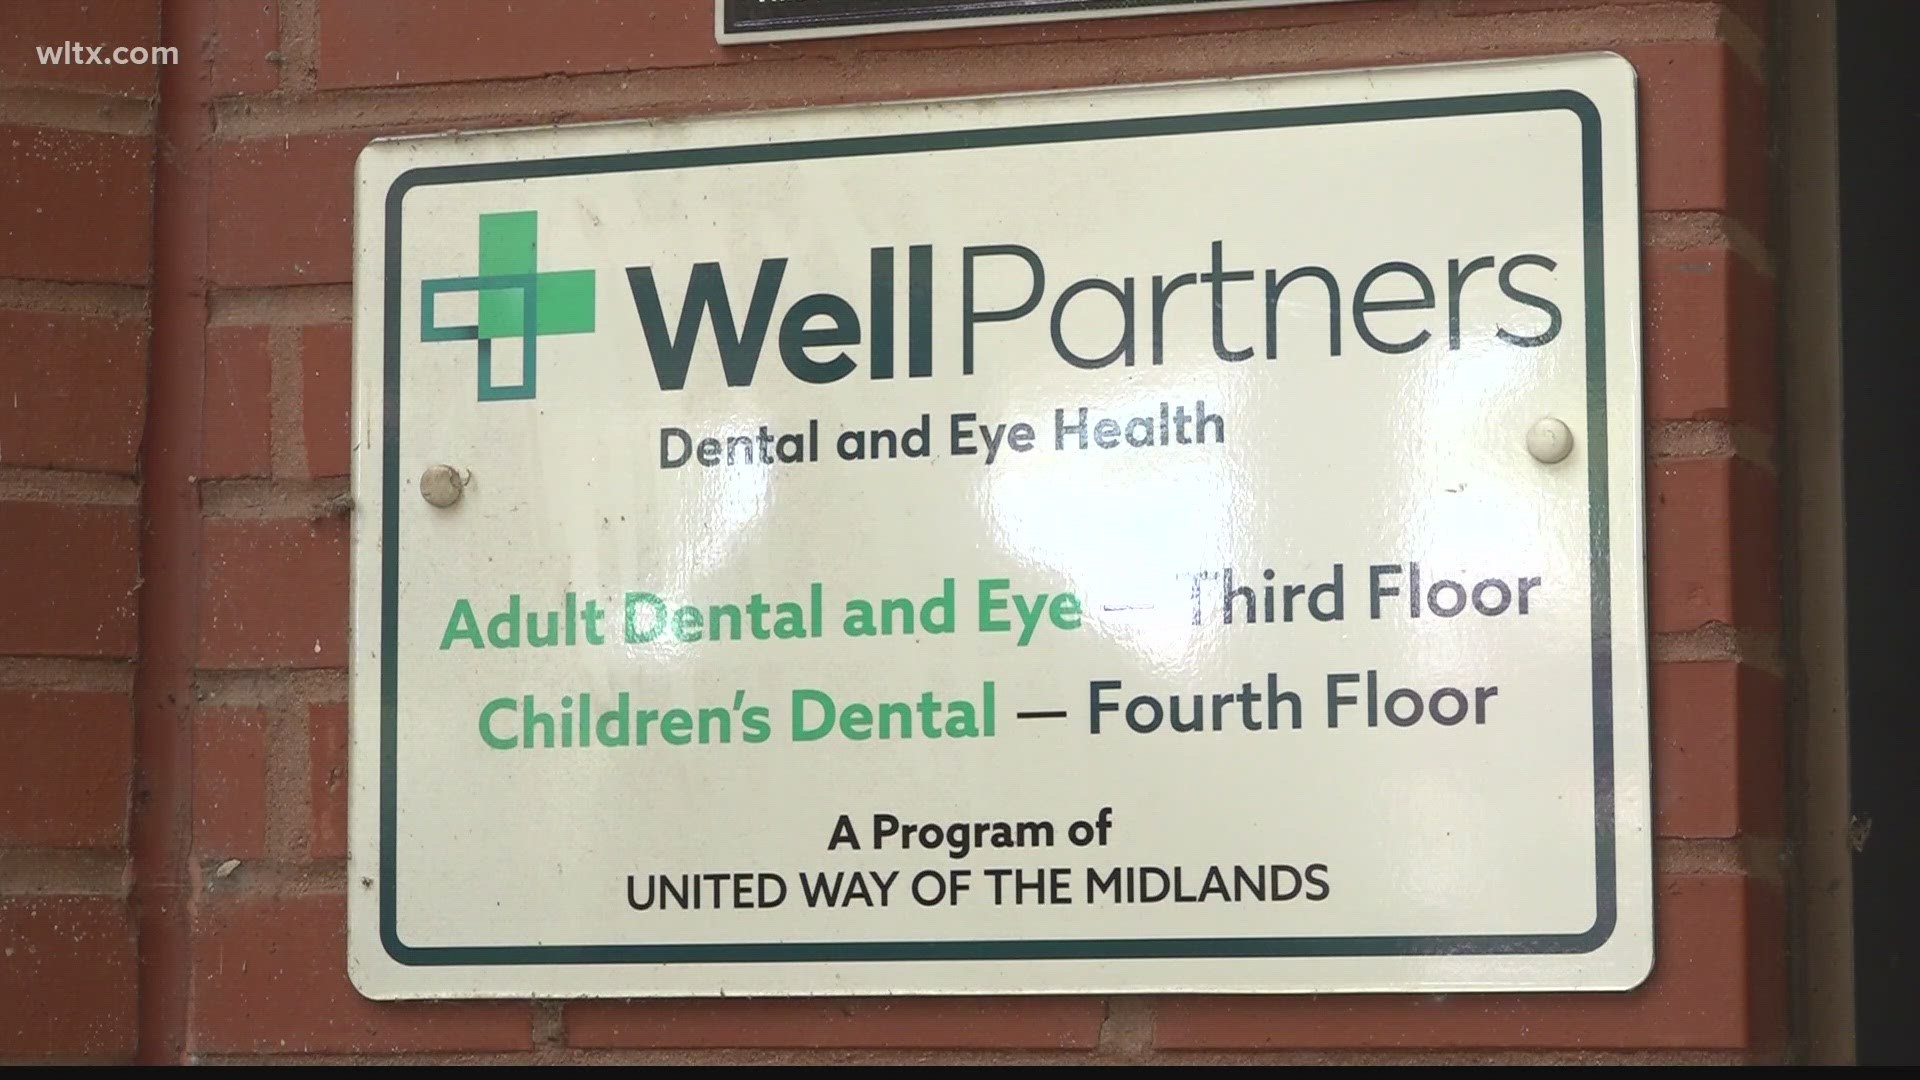 The free community clinic for patients without vision or dental insurance.